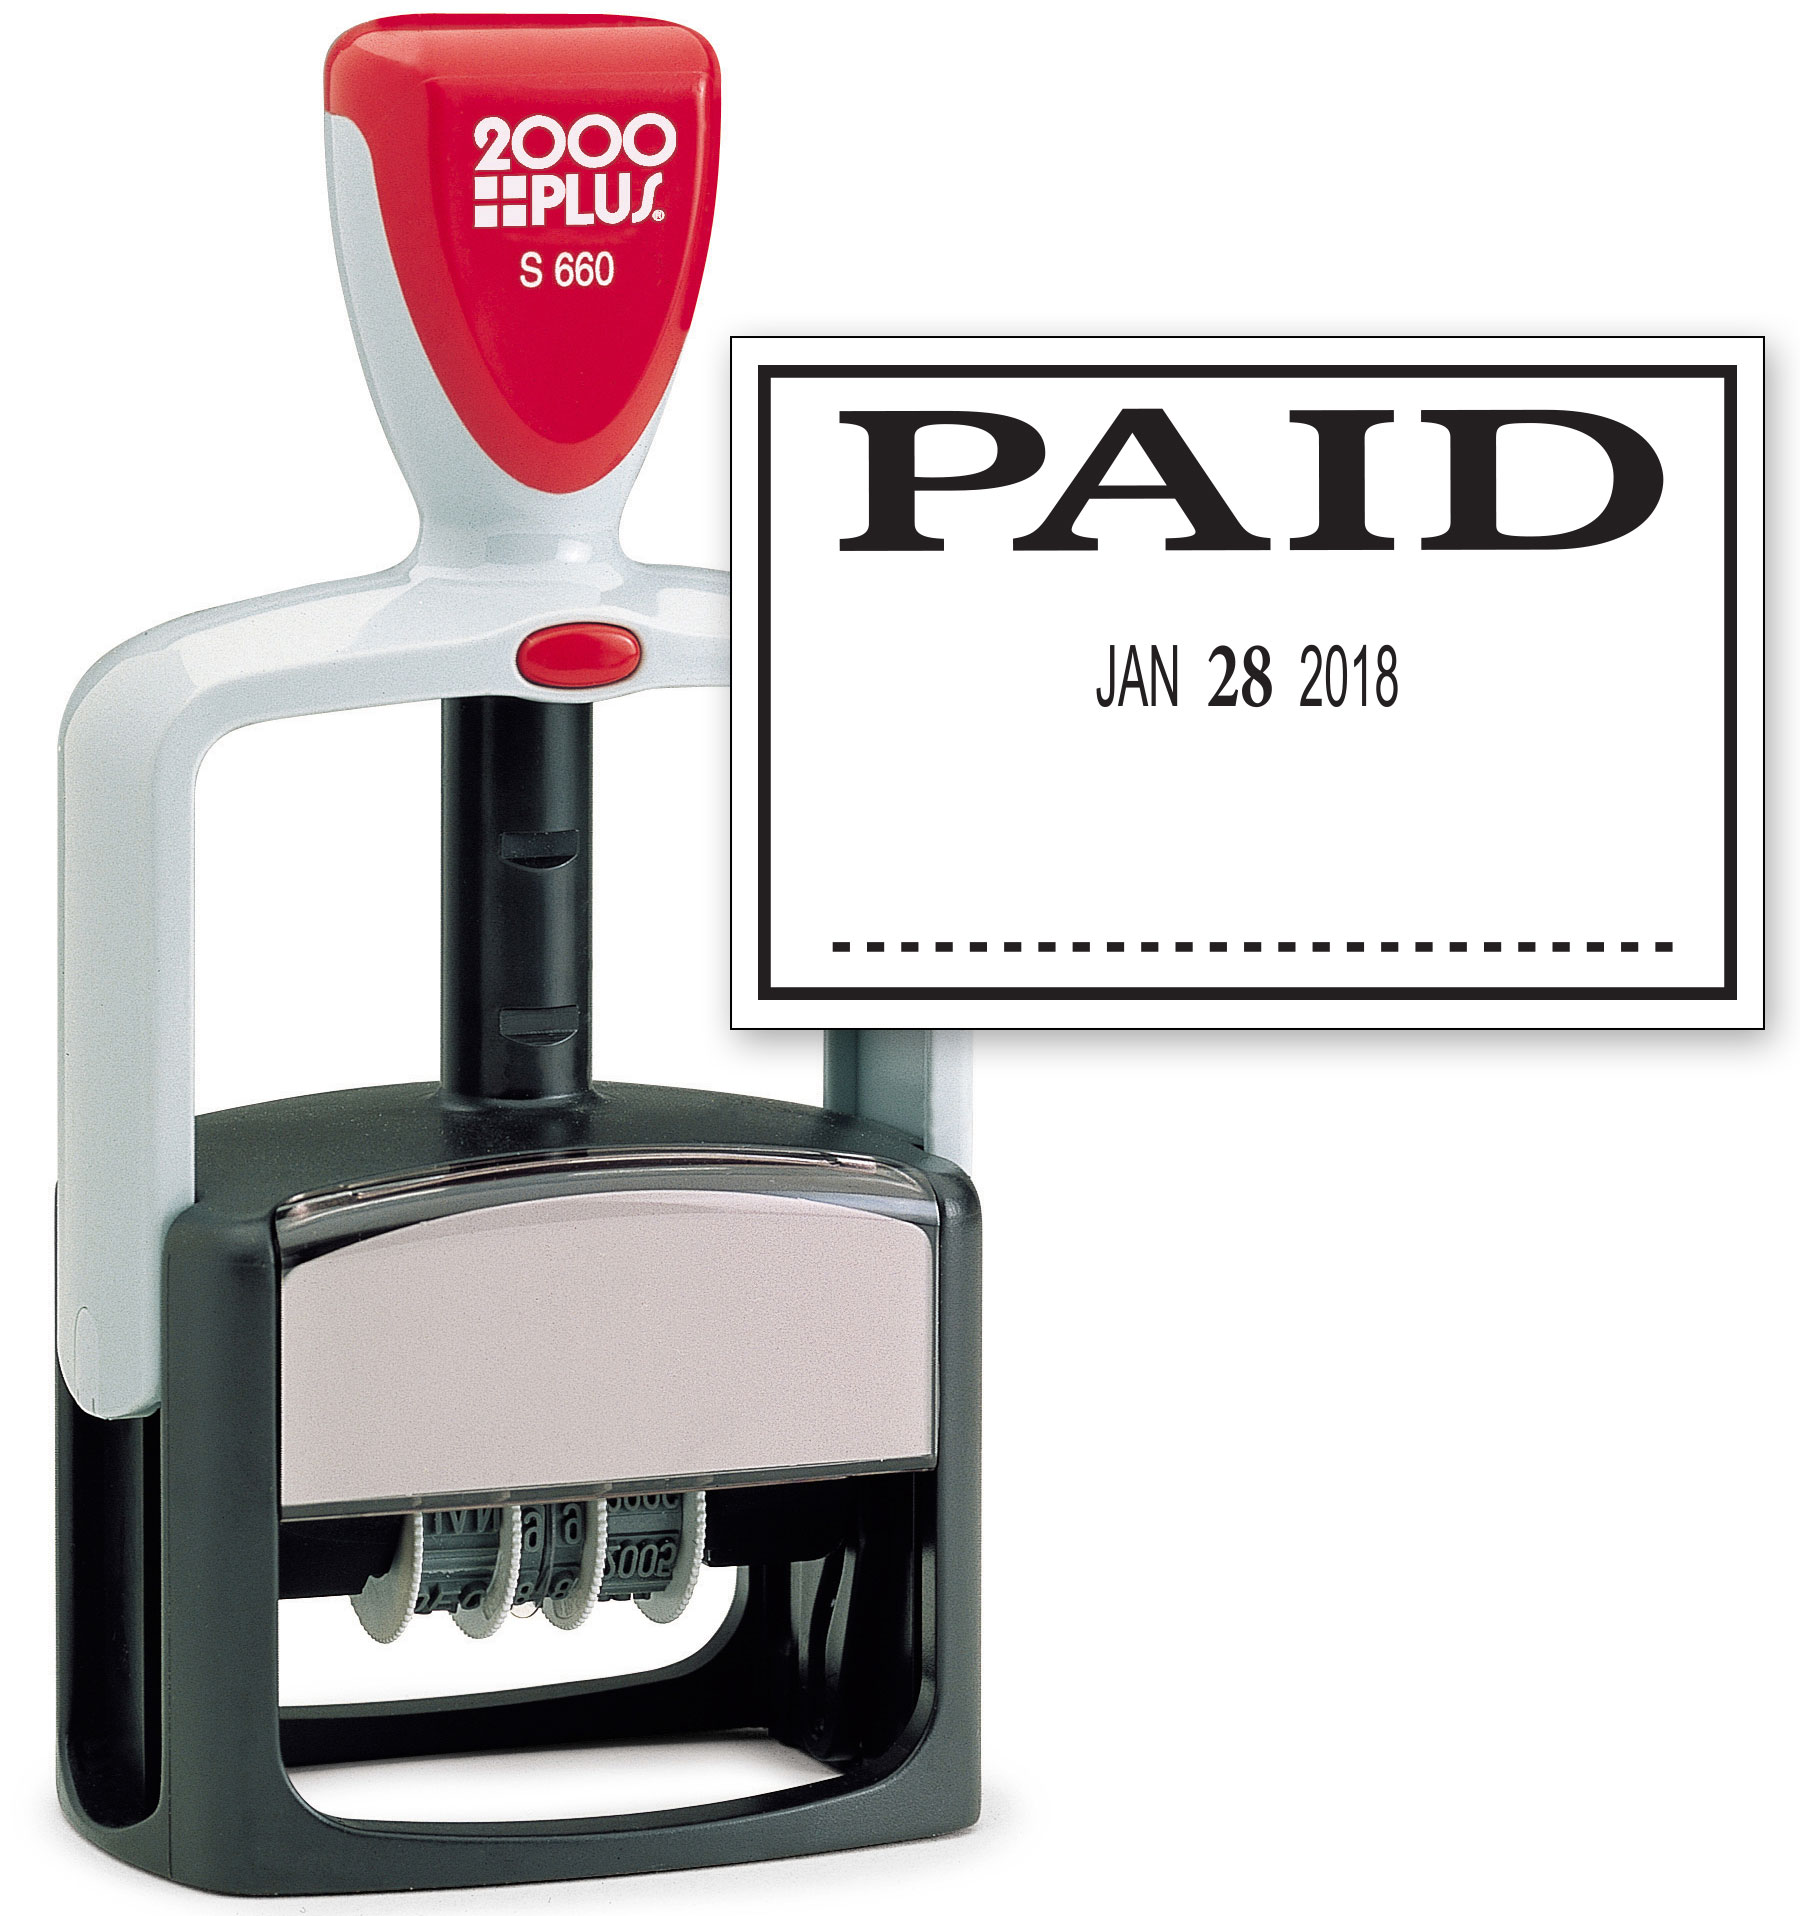 2000 PLUS Heavy Duty Style 2-Color Date Stamp with PAID self inking stamp - BLACK Ink